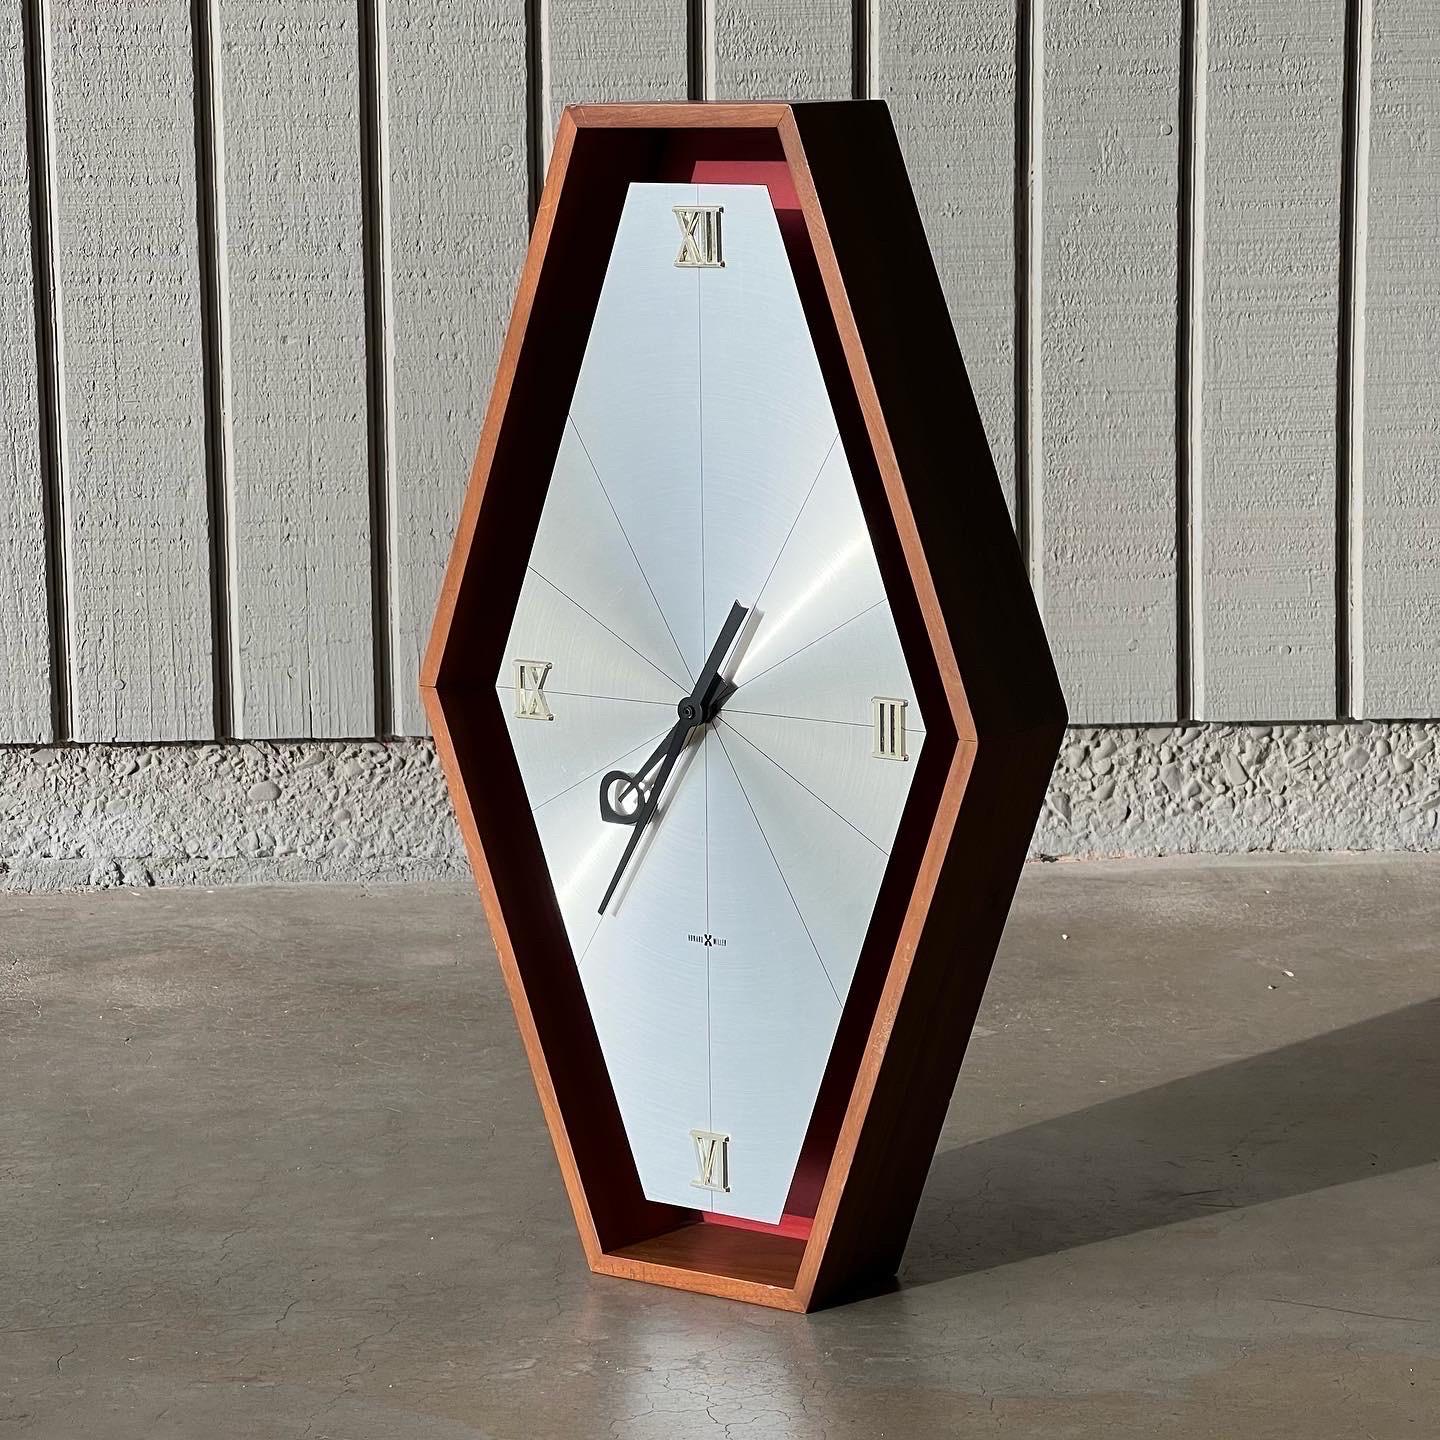 Arthur Umanoff for Howard Miller 1970s wall clock, model #588. Made of a walnut case, original red back, brushed aluminum clock face, brass Roman numerals and black hour and minute hands. In working condition and battery-powered. 11.75” wide x 20.5”